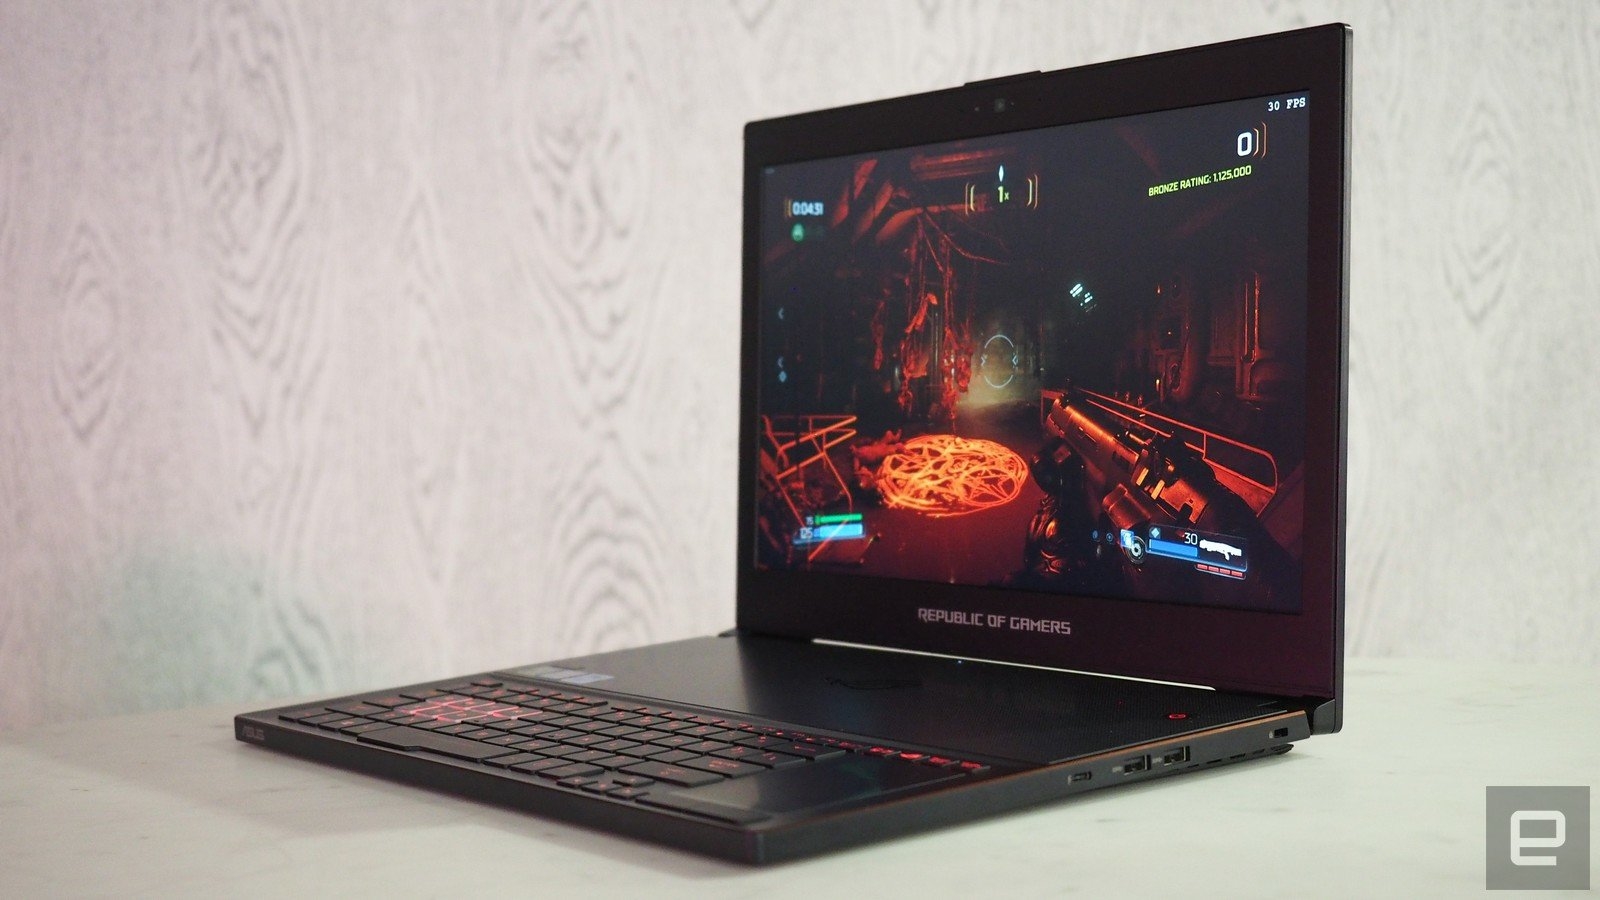 ASUS ROG Zephyrus review: Gaming laptops will never be the same again | DeviceDaily.com